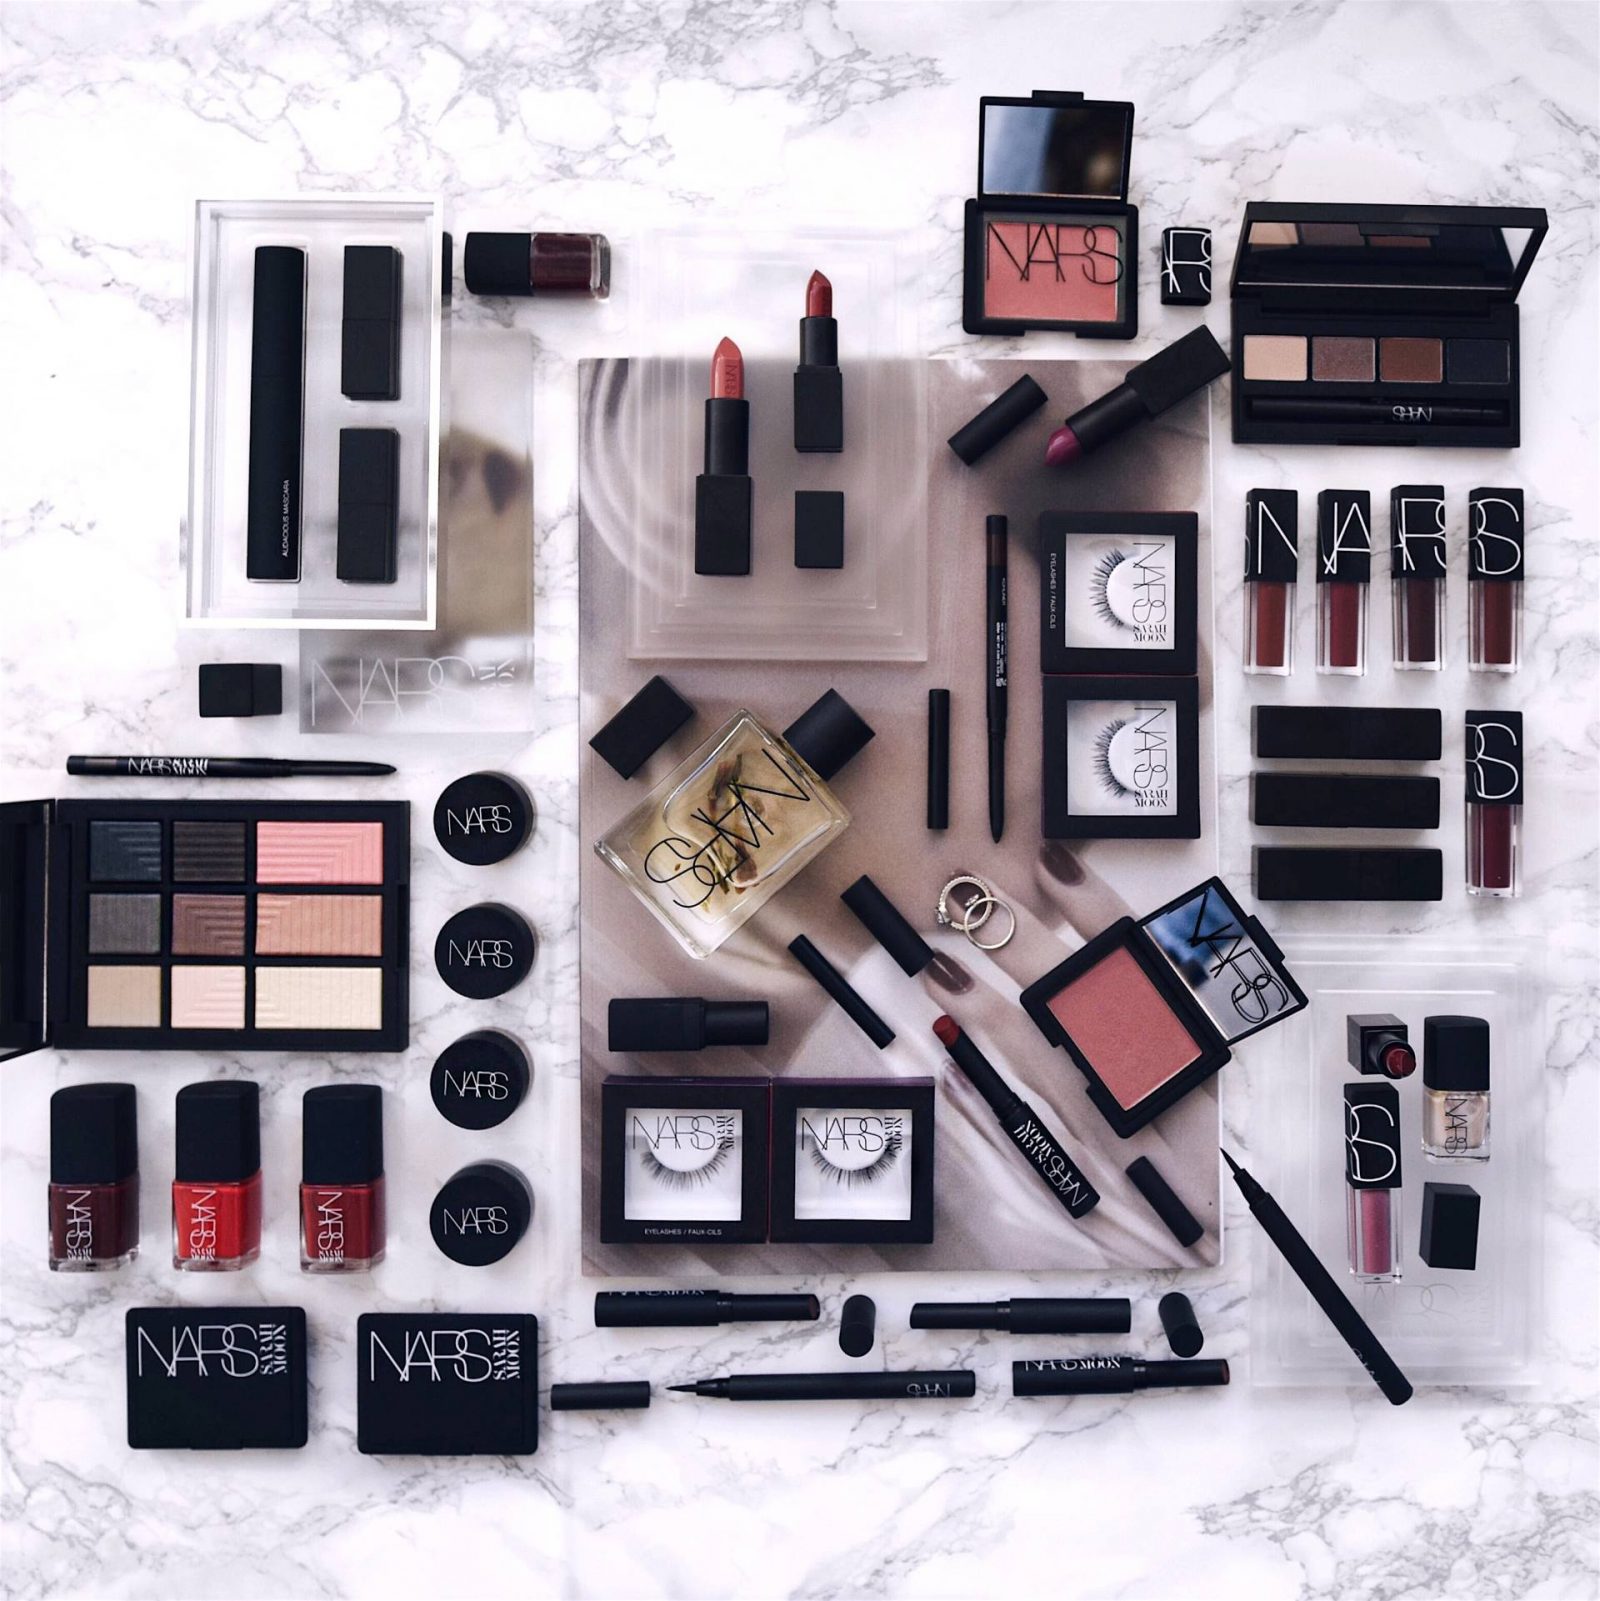 Can You Be More Obsessed with NARS? Absolutely!